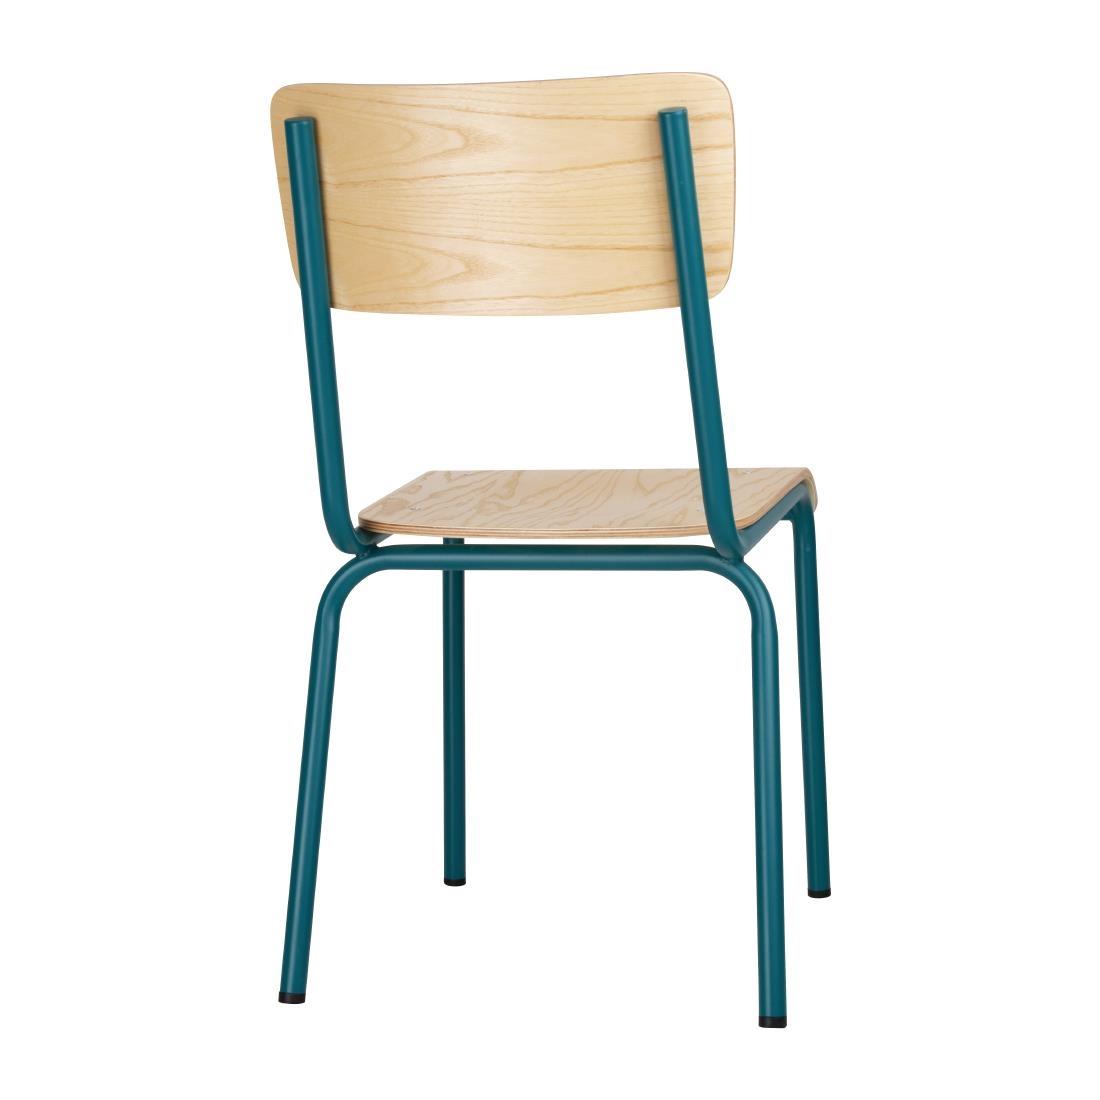 Bolero Cantina Side Chairs with Wooden Seat Pad and Backrest Teal (Pack of 4) - FB944  - 3